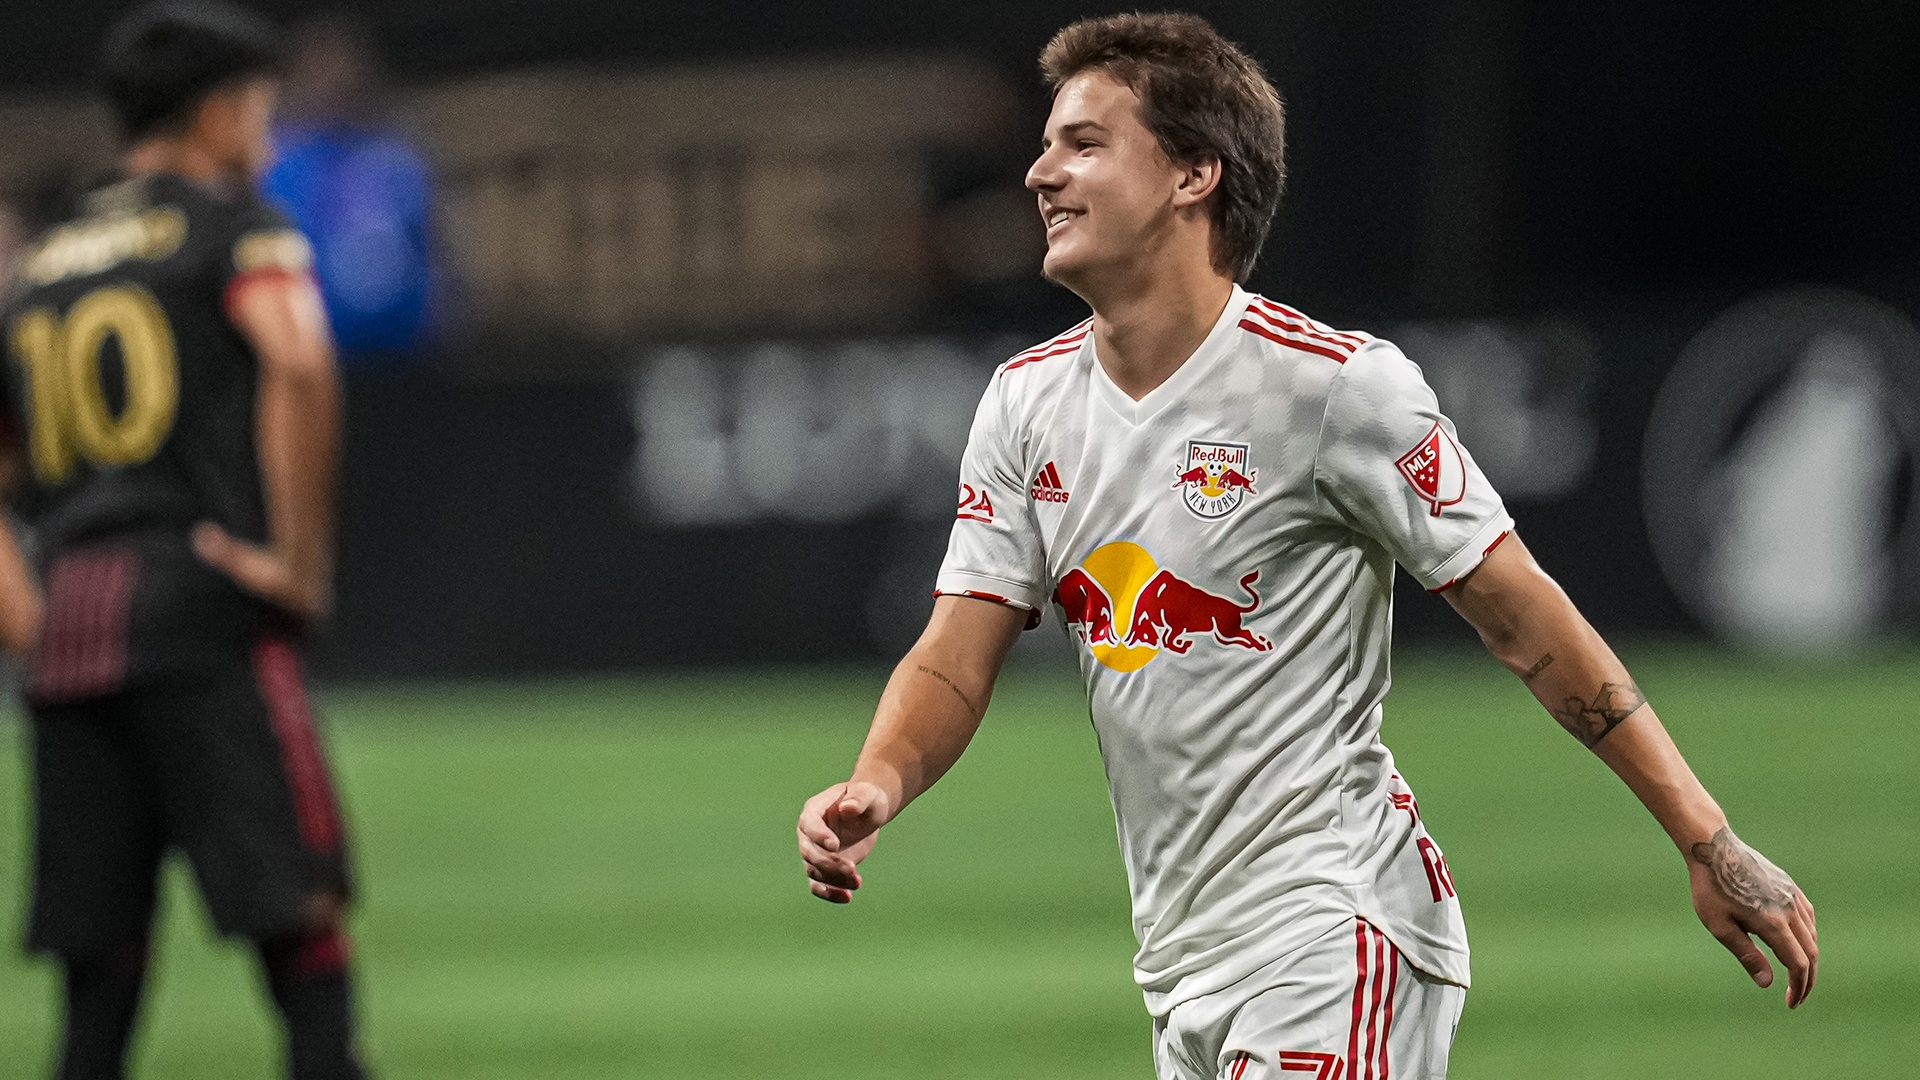 Who were the best young-player performers in MLS Week 26?